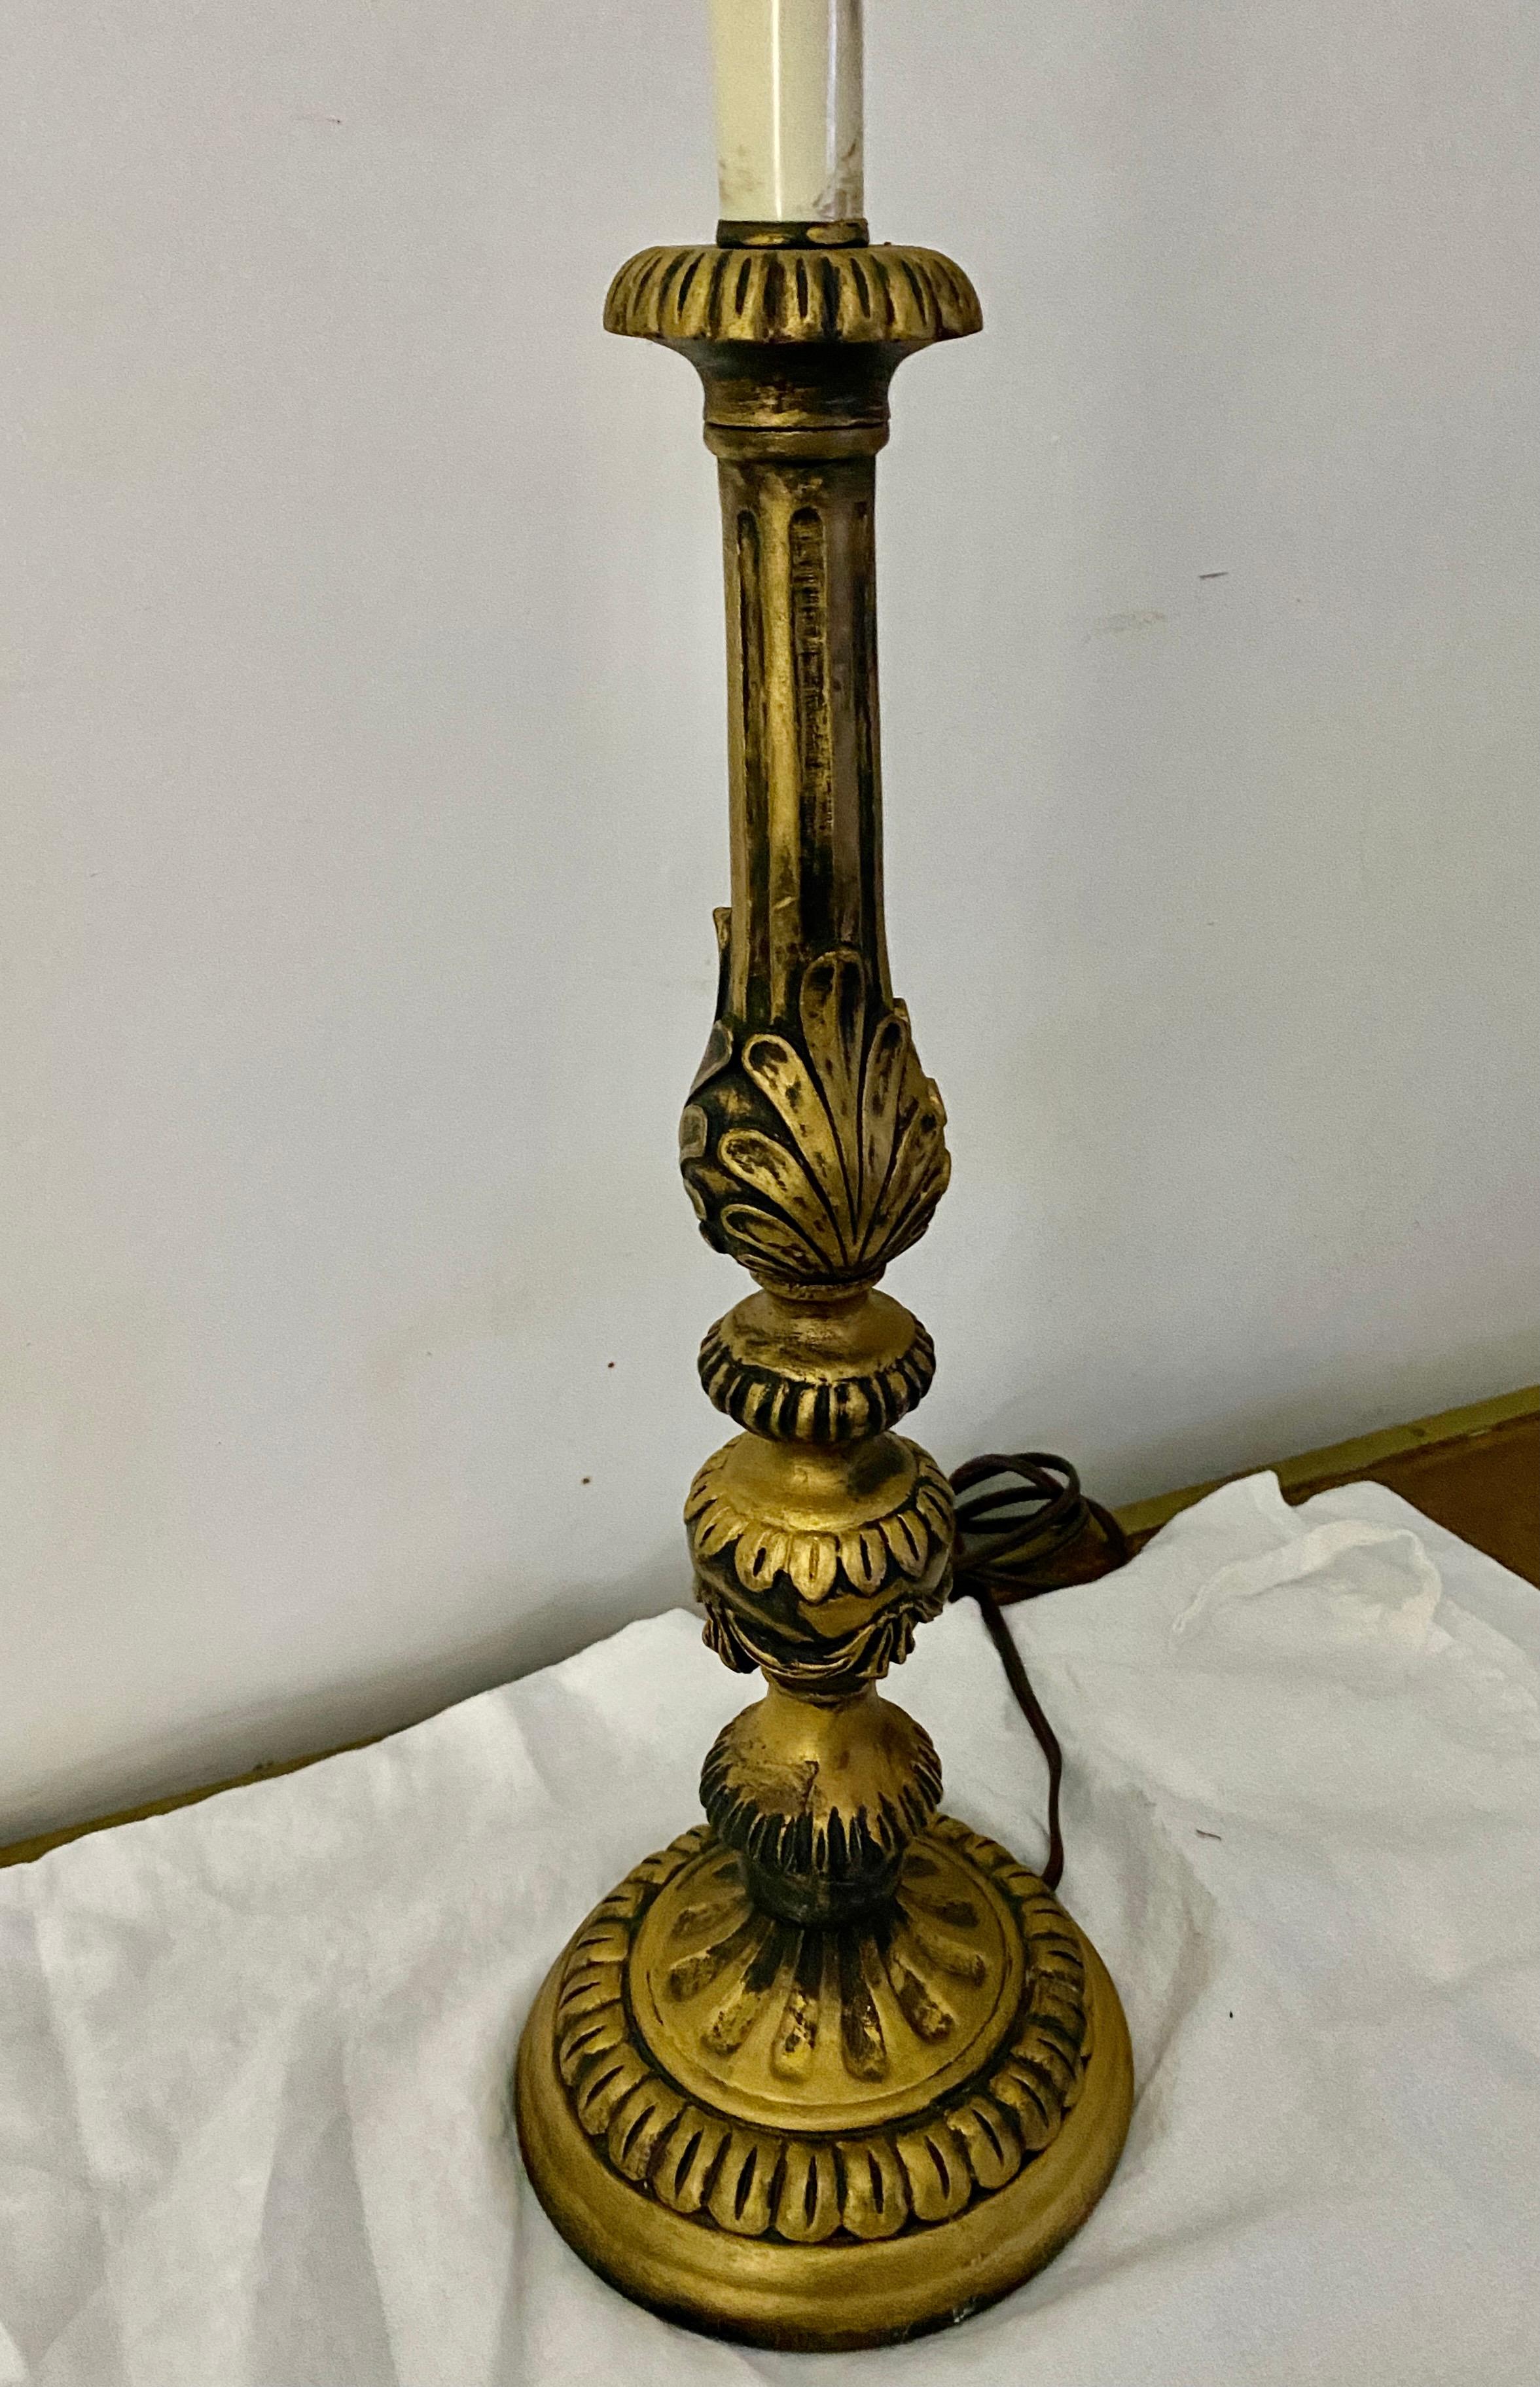 A wonderful vintage Italian baroque style gilt wood candlestick table lamp makes a wonderful addition in any room.
Search term: Hollywood Regency, rococo style lamp.